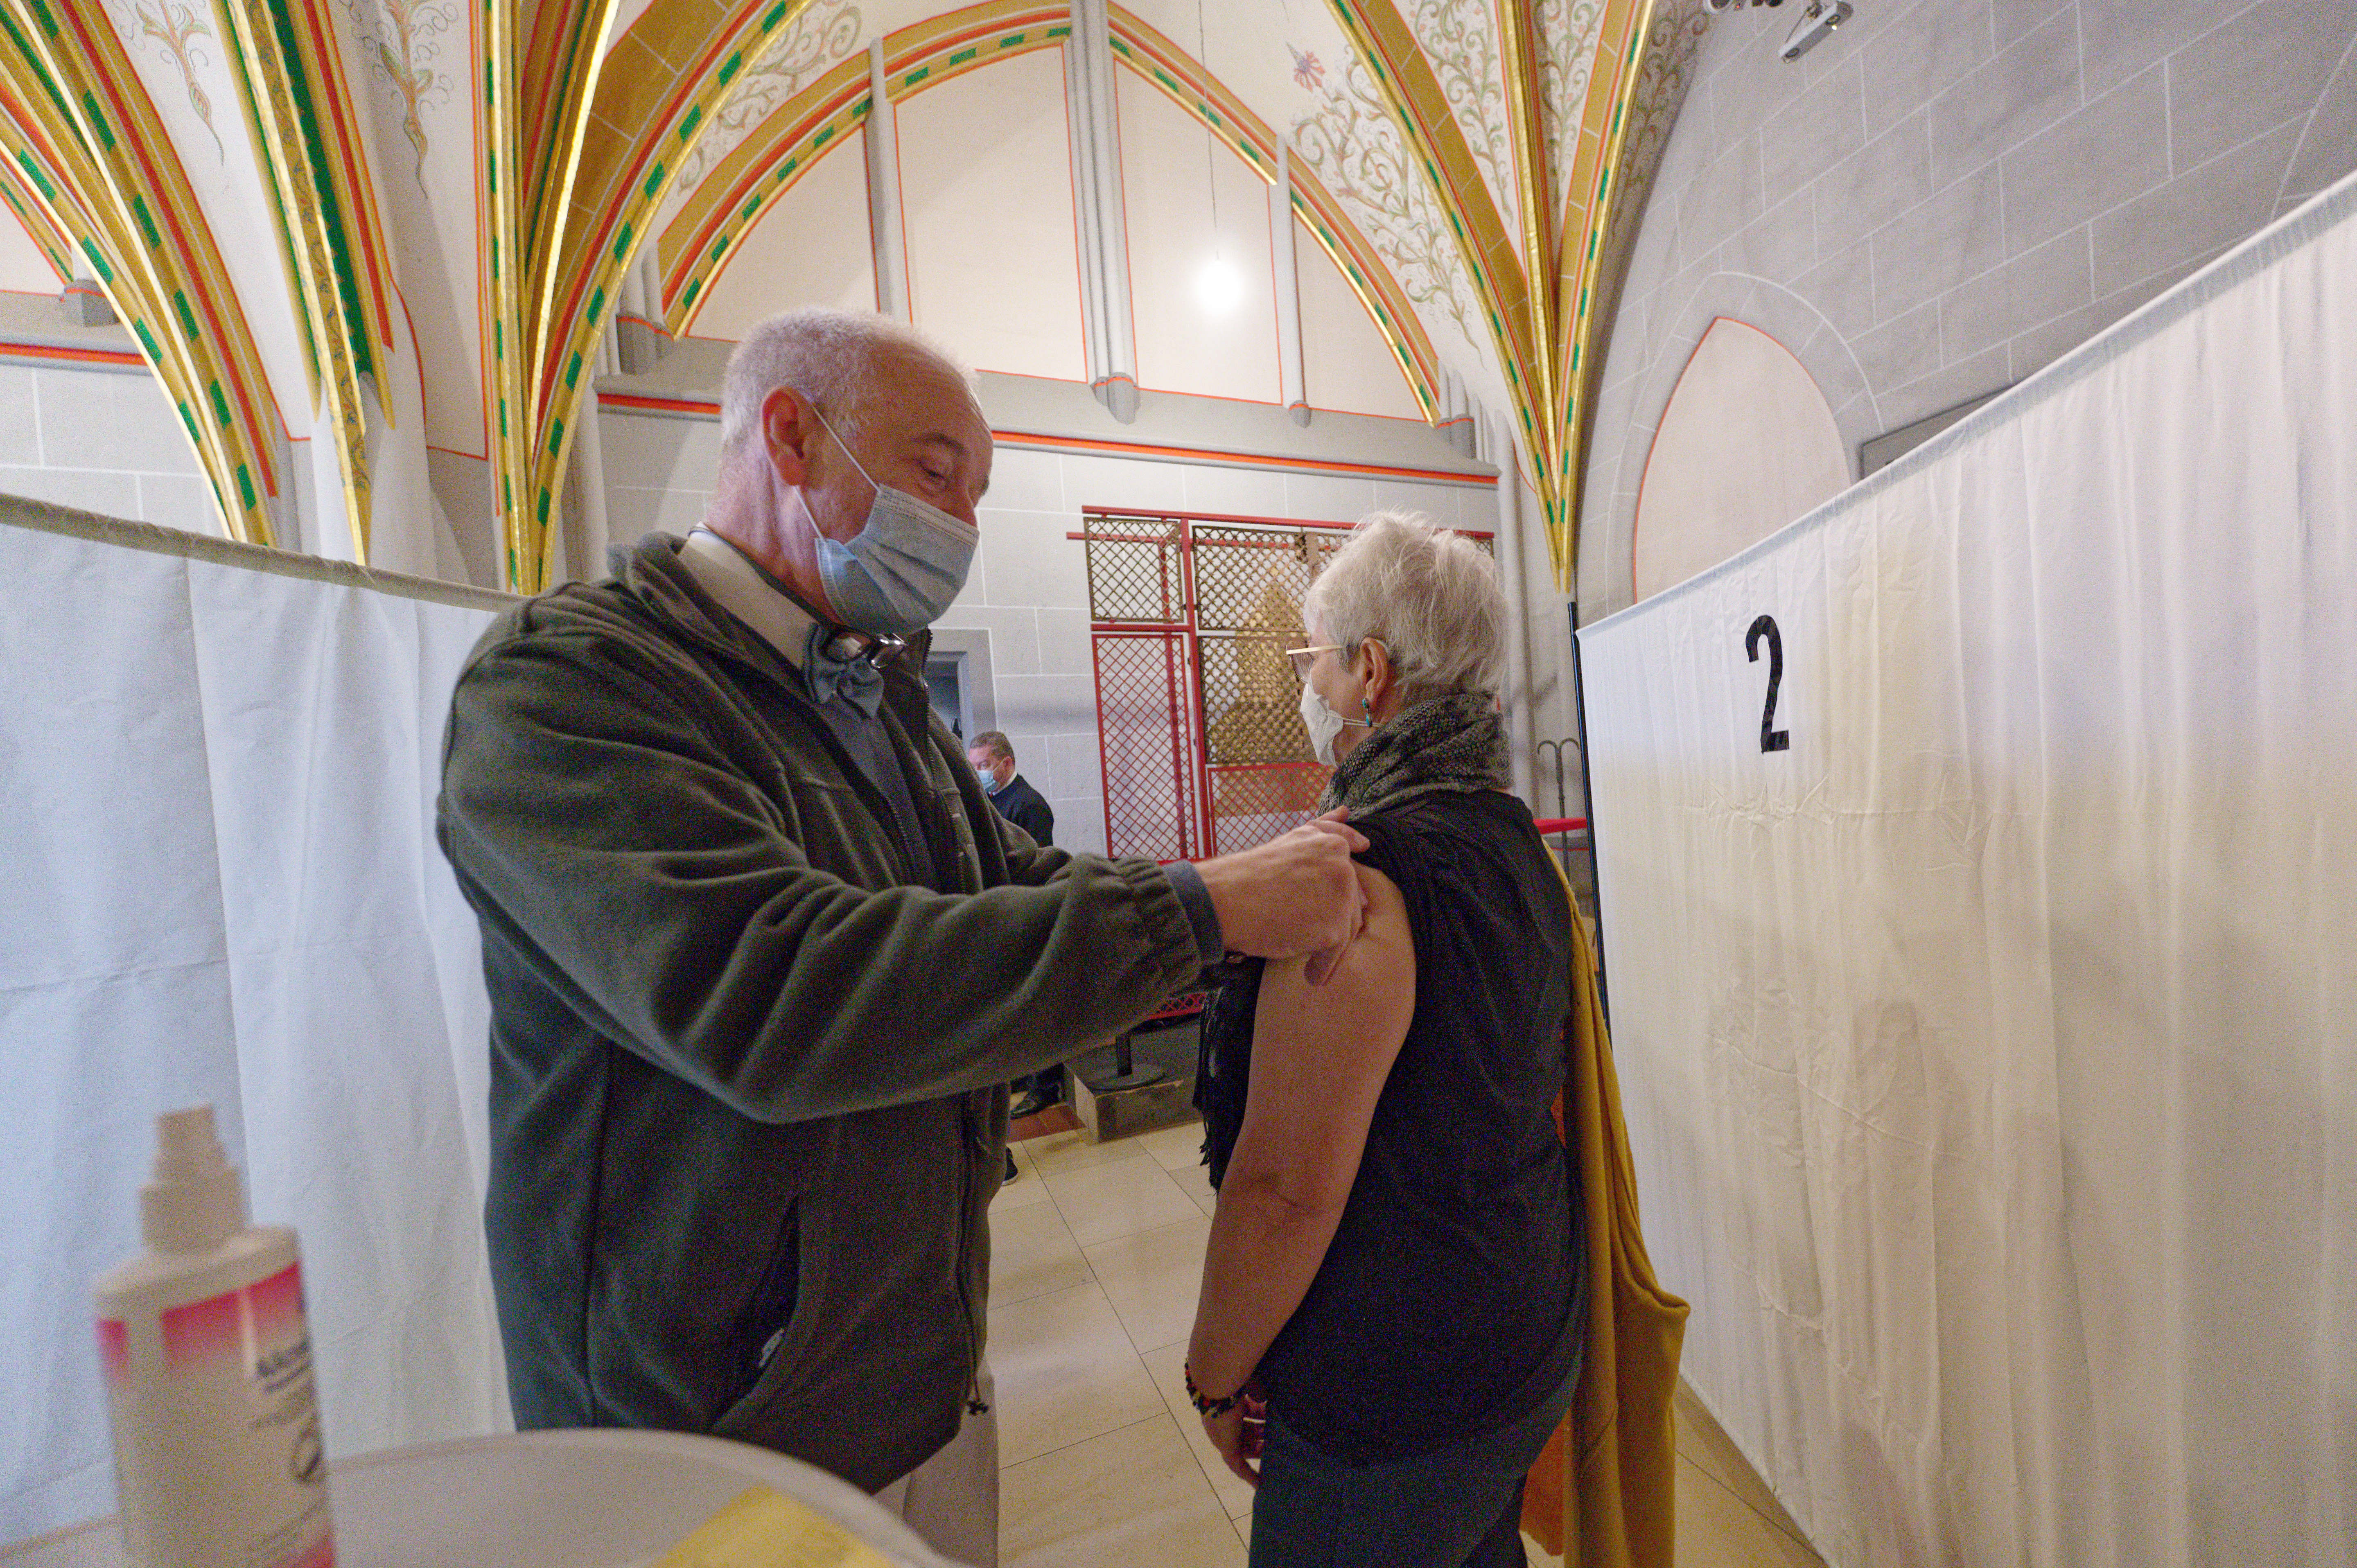 A woman receives a vaccination during a Christmas vaccination campaign in the Dreikönigensaal of Cologne Cathedral. 24 December 2021, North Rhine-Westphalia, Cologne